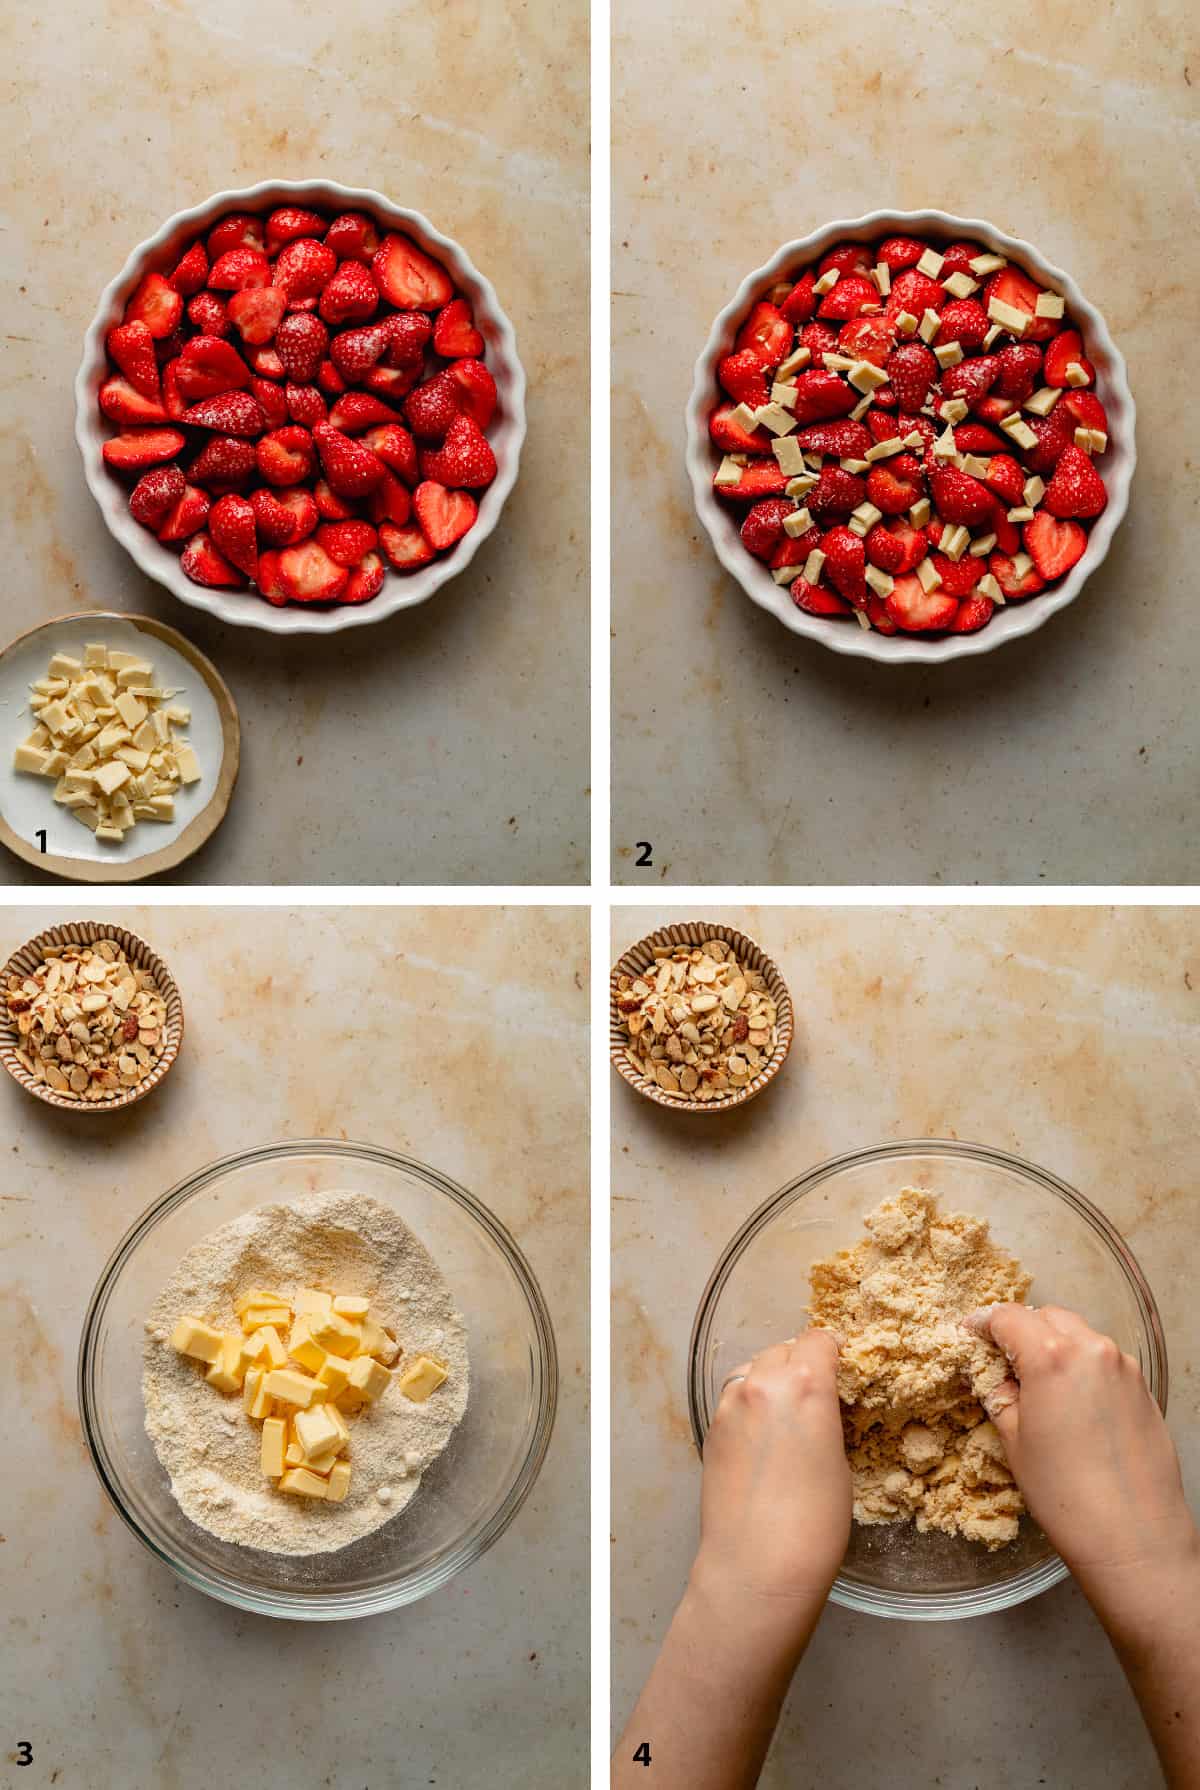 Process steps of making the strawberry filling and making the crumble topping.